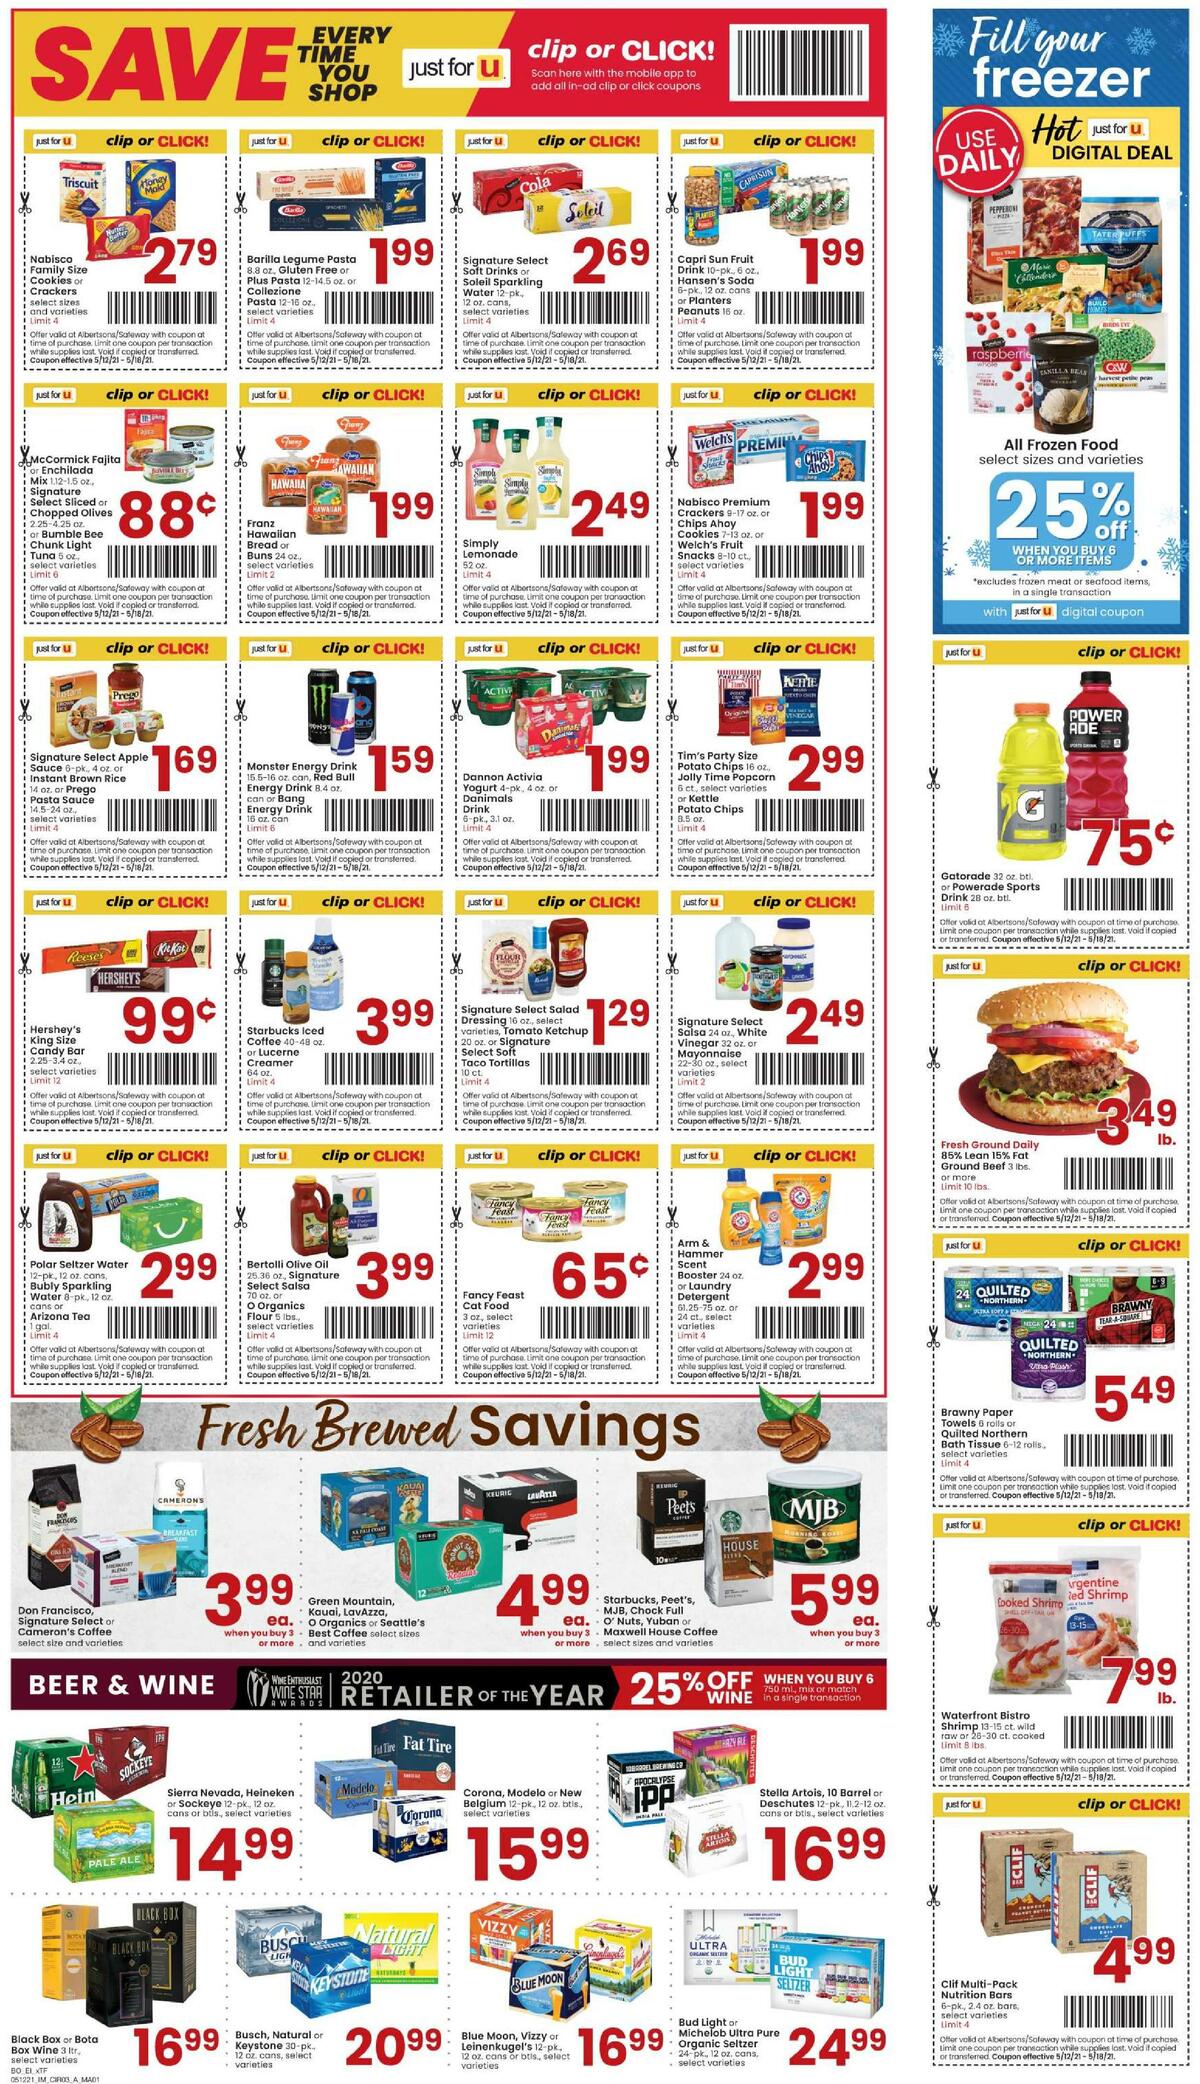 Albertsons Weekly Ad from May 12